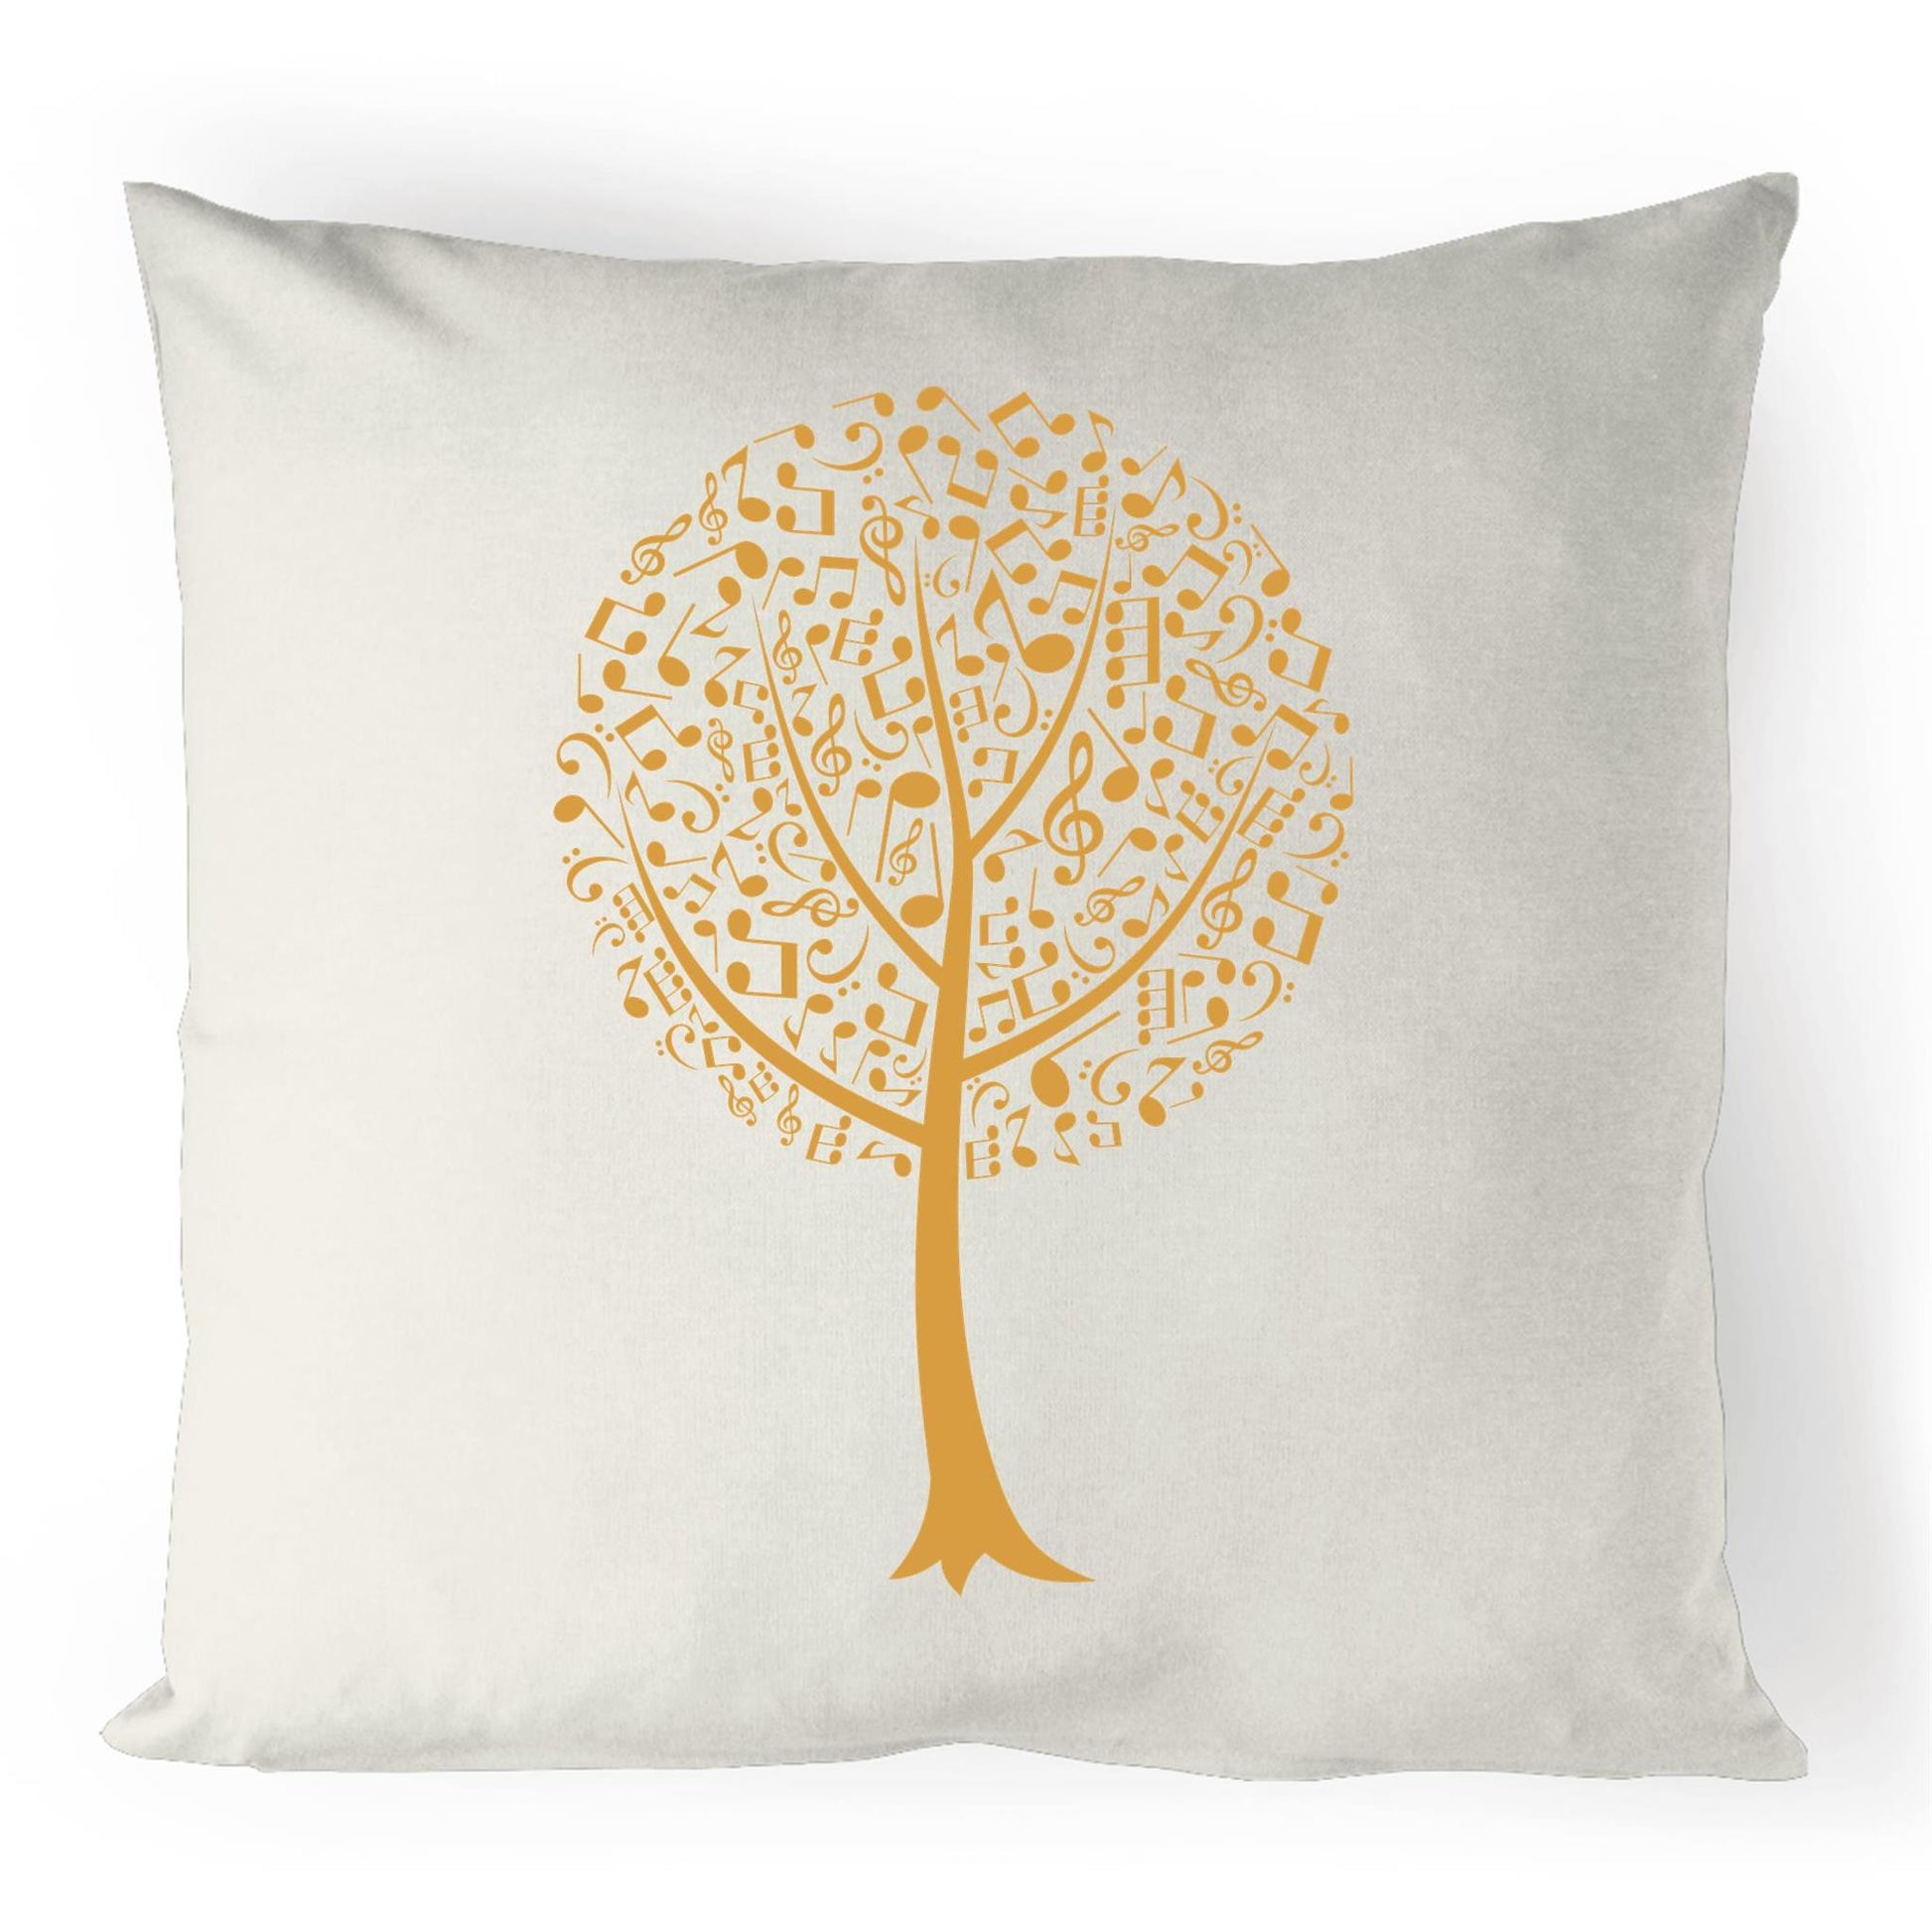 Music Tree - 100% Linen Cushion Cover Natural One-Size Linen Cushion Cover Music Plants